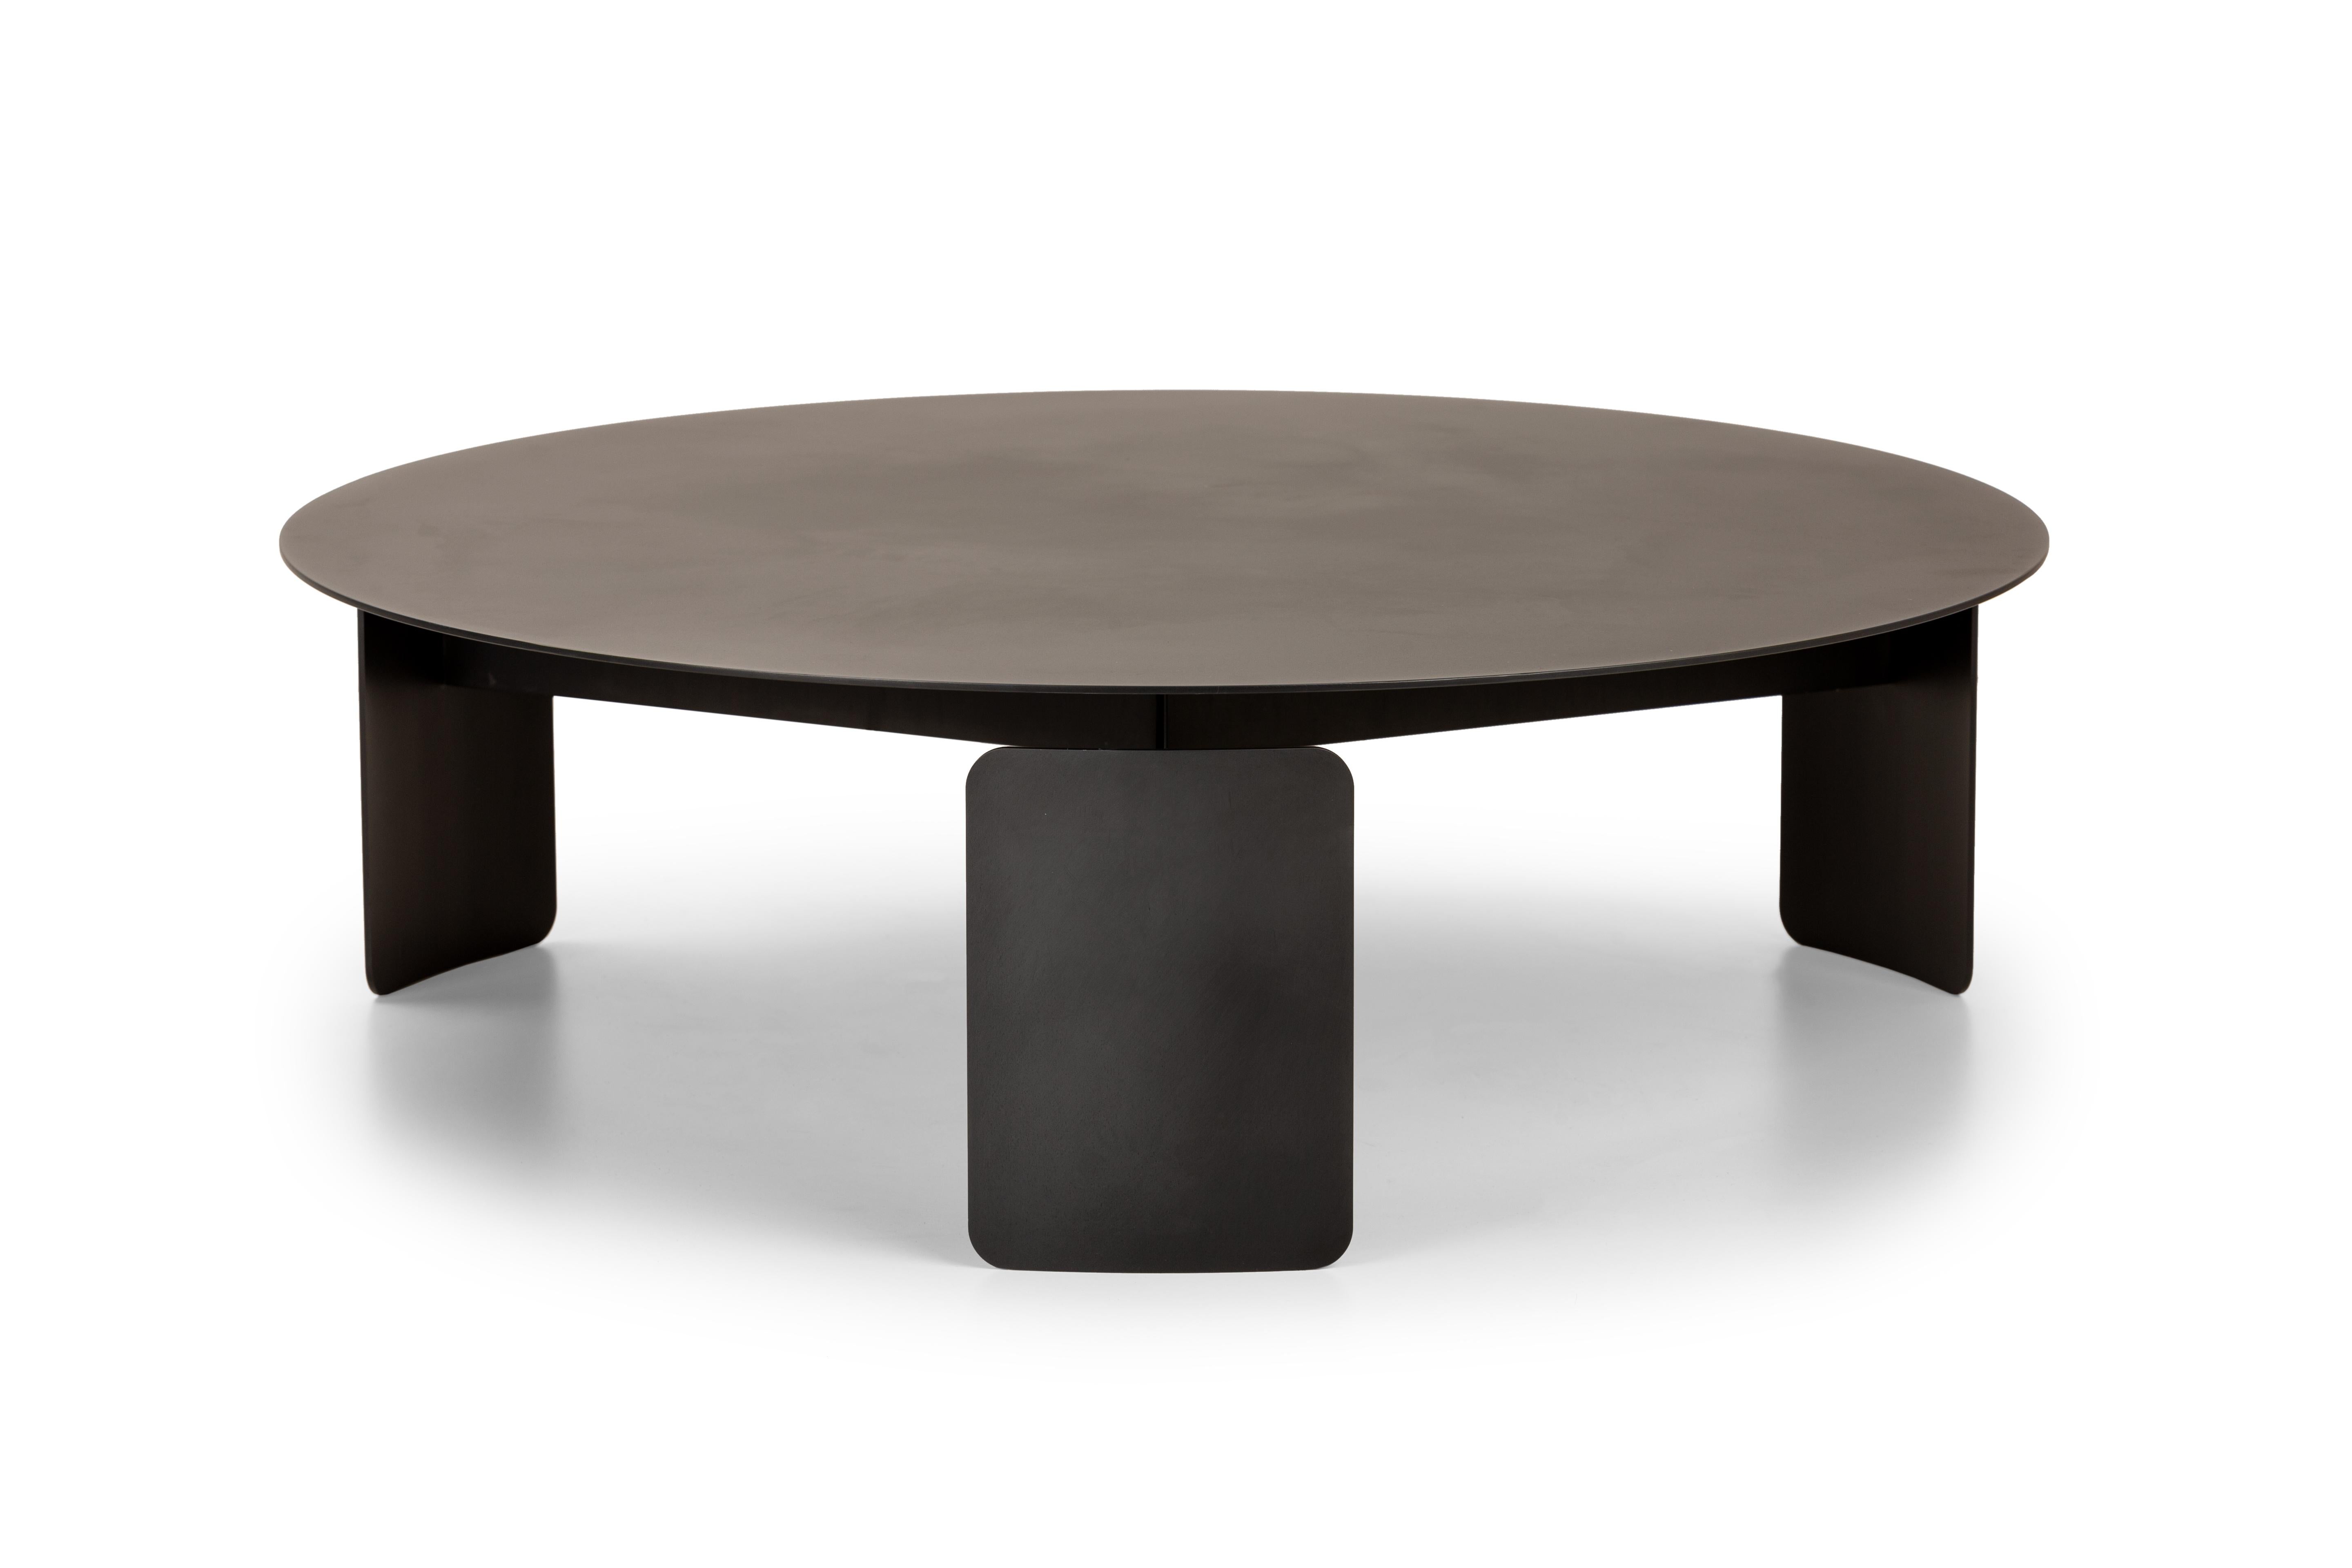 Shirudo iron finish coffee table by Mingardo
Dimensions: D 90 x H 28 cm 
Materials: RAL 9005 black varnished iron structure
Weight: 45 kg

Also Available in different finishes.

The name Shirudo comes from the Japanese word for shield – a shape that